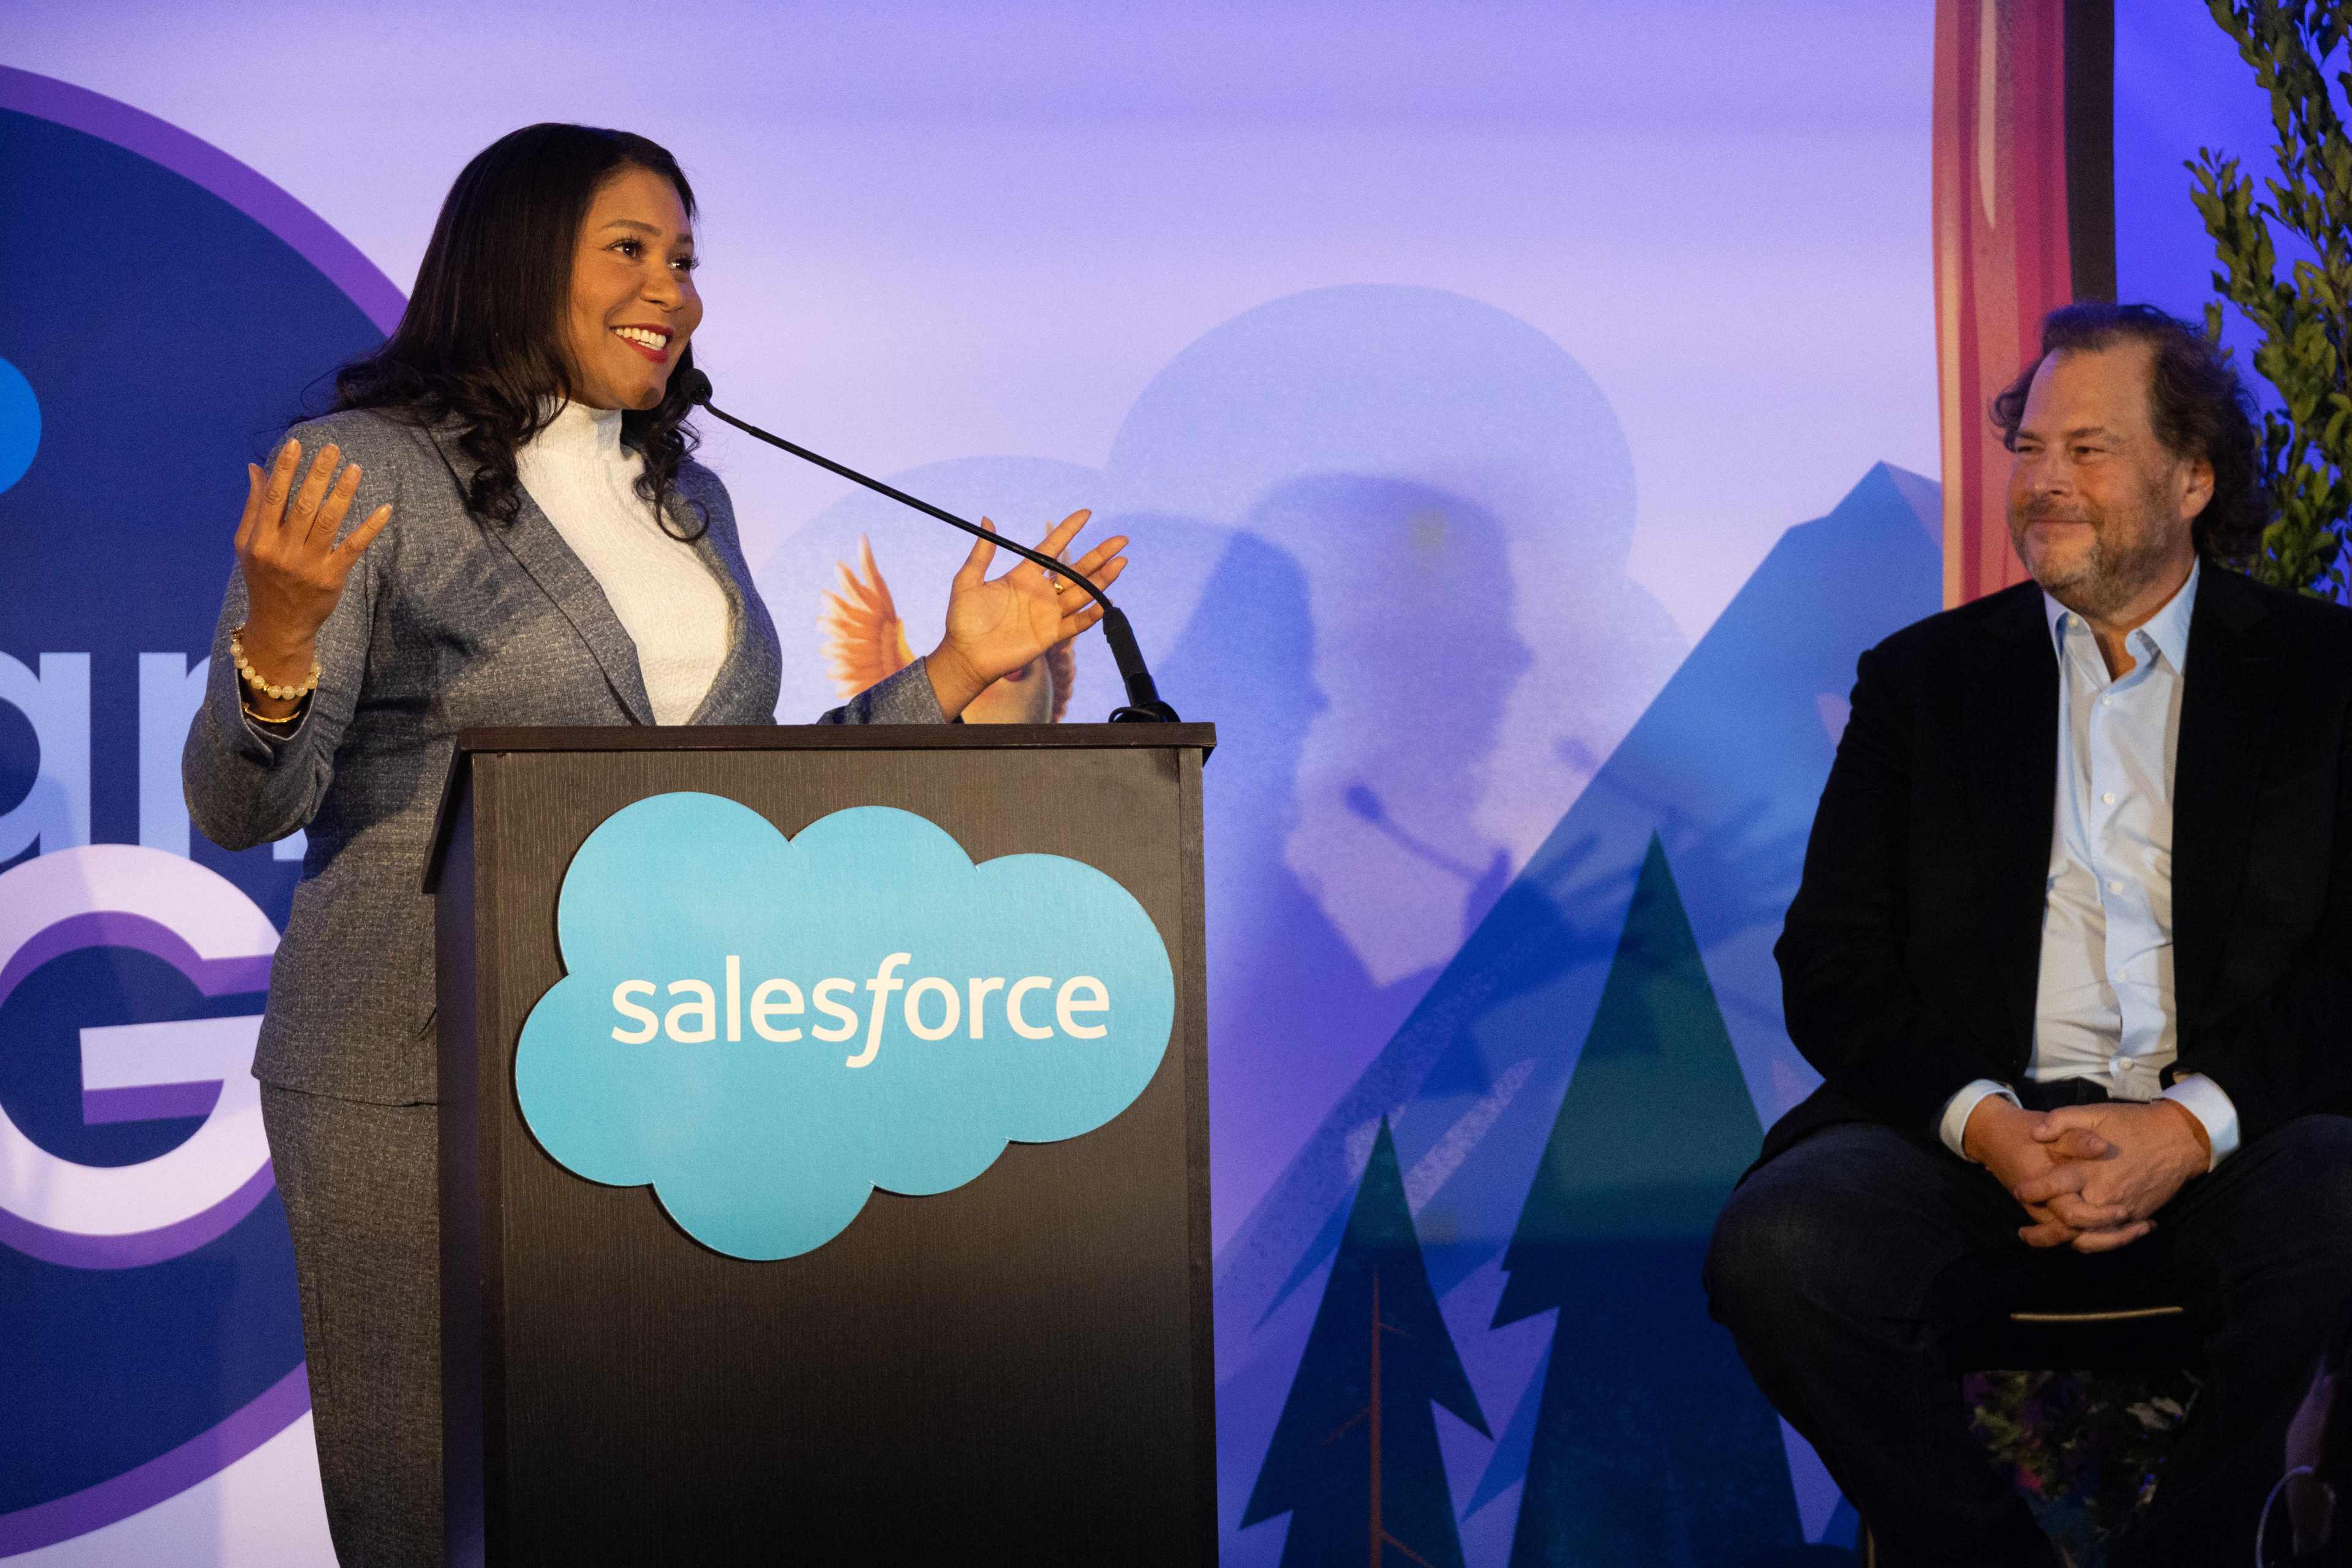 To Boost AI Education, Salesforce Gives $11M to San Francisco, Oakland Schools